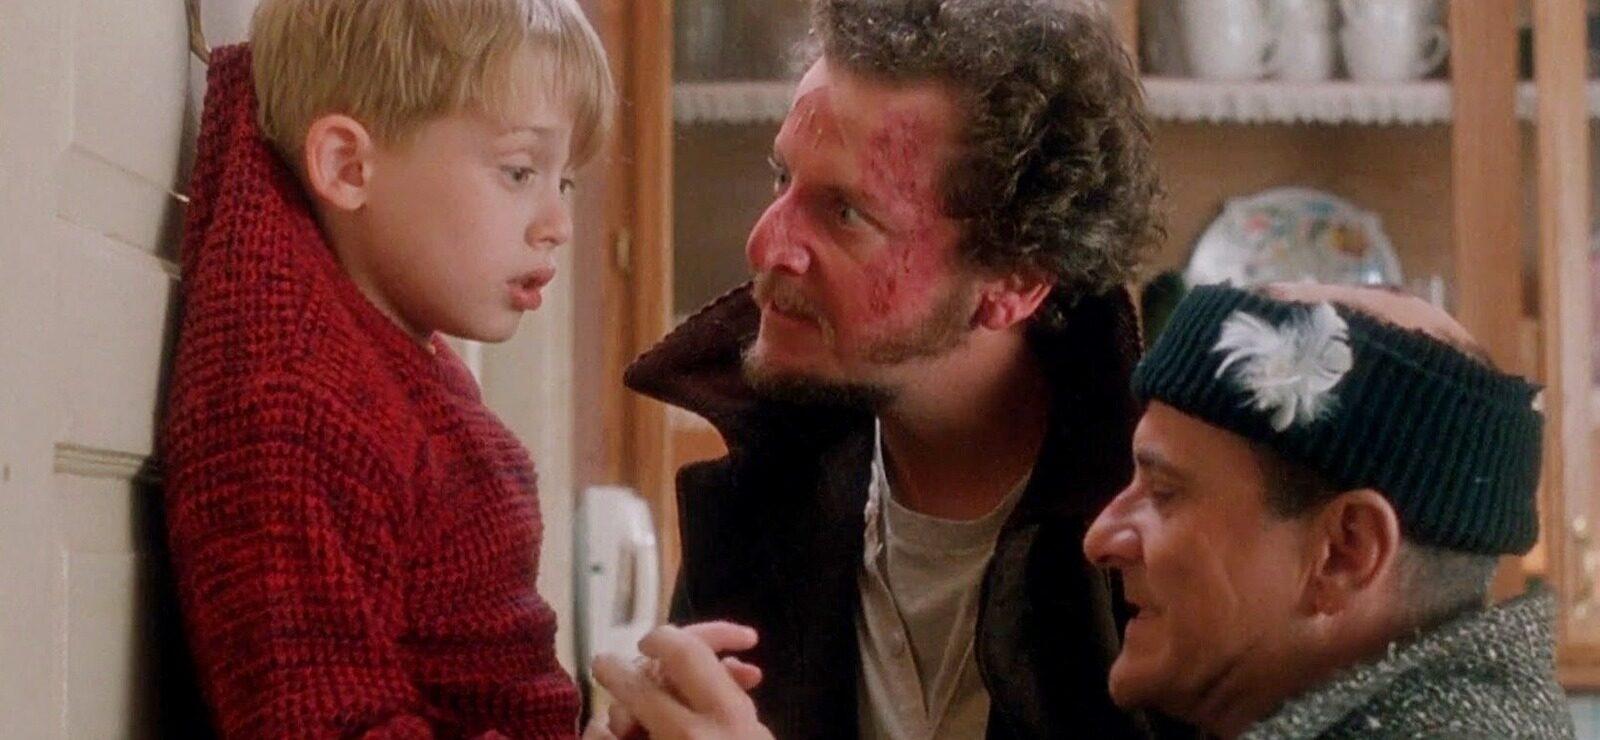 Joe Pesci "Sustained Serious Burns" When Filming 'Home Alone'